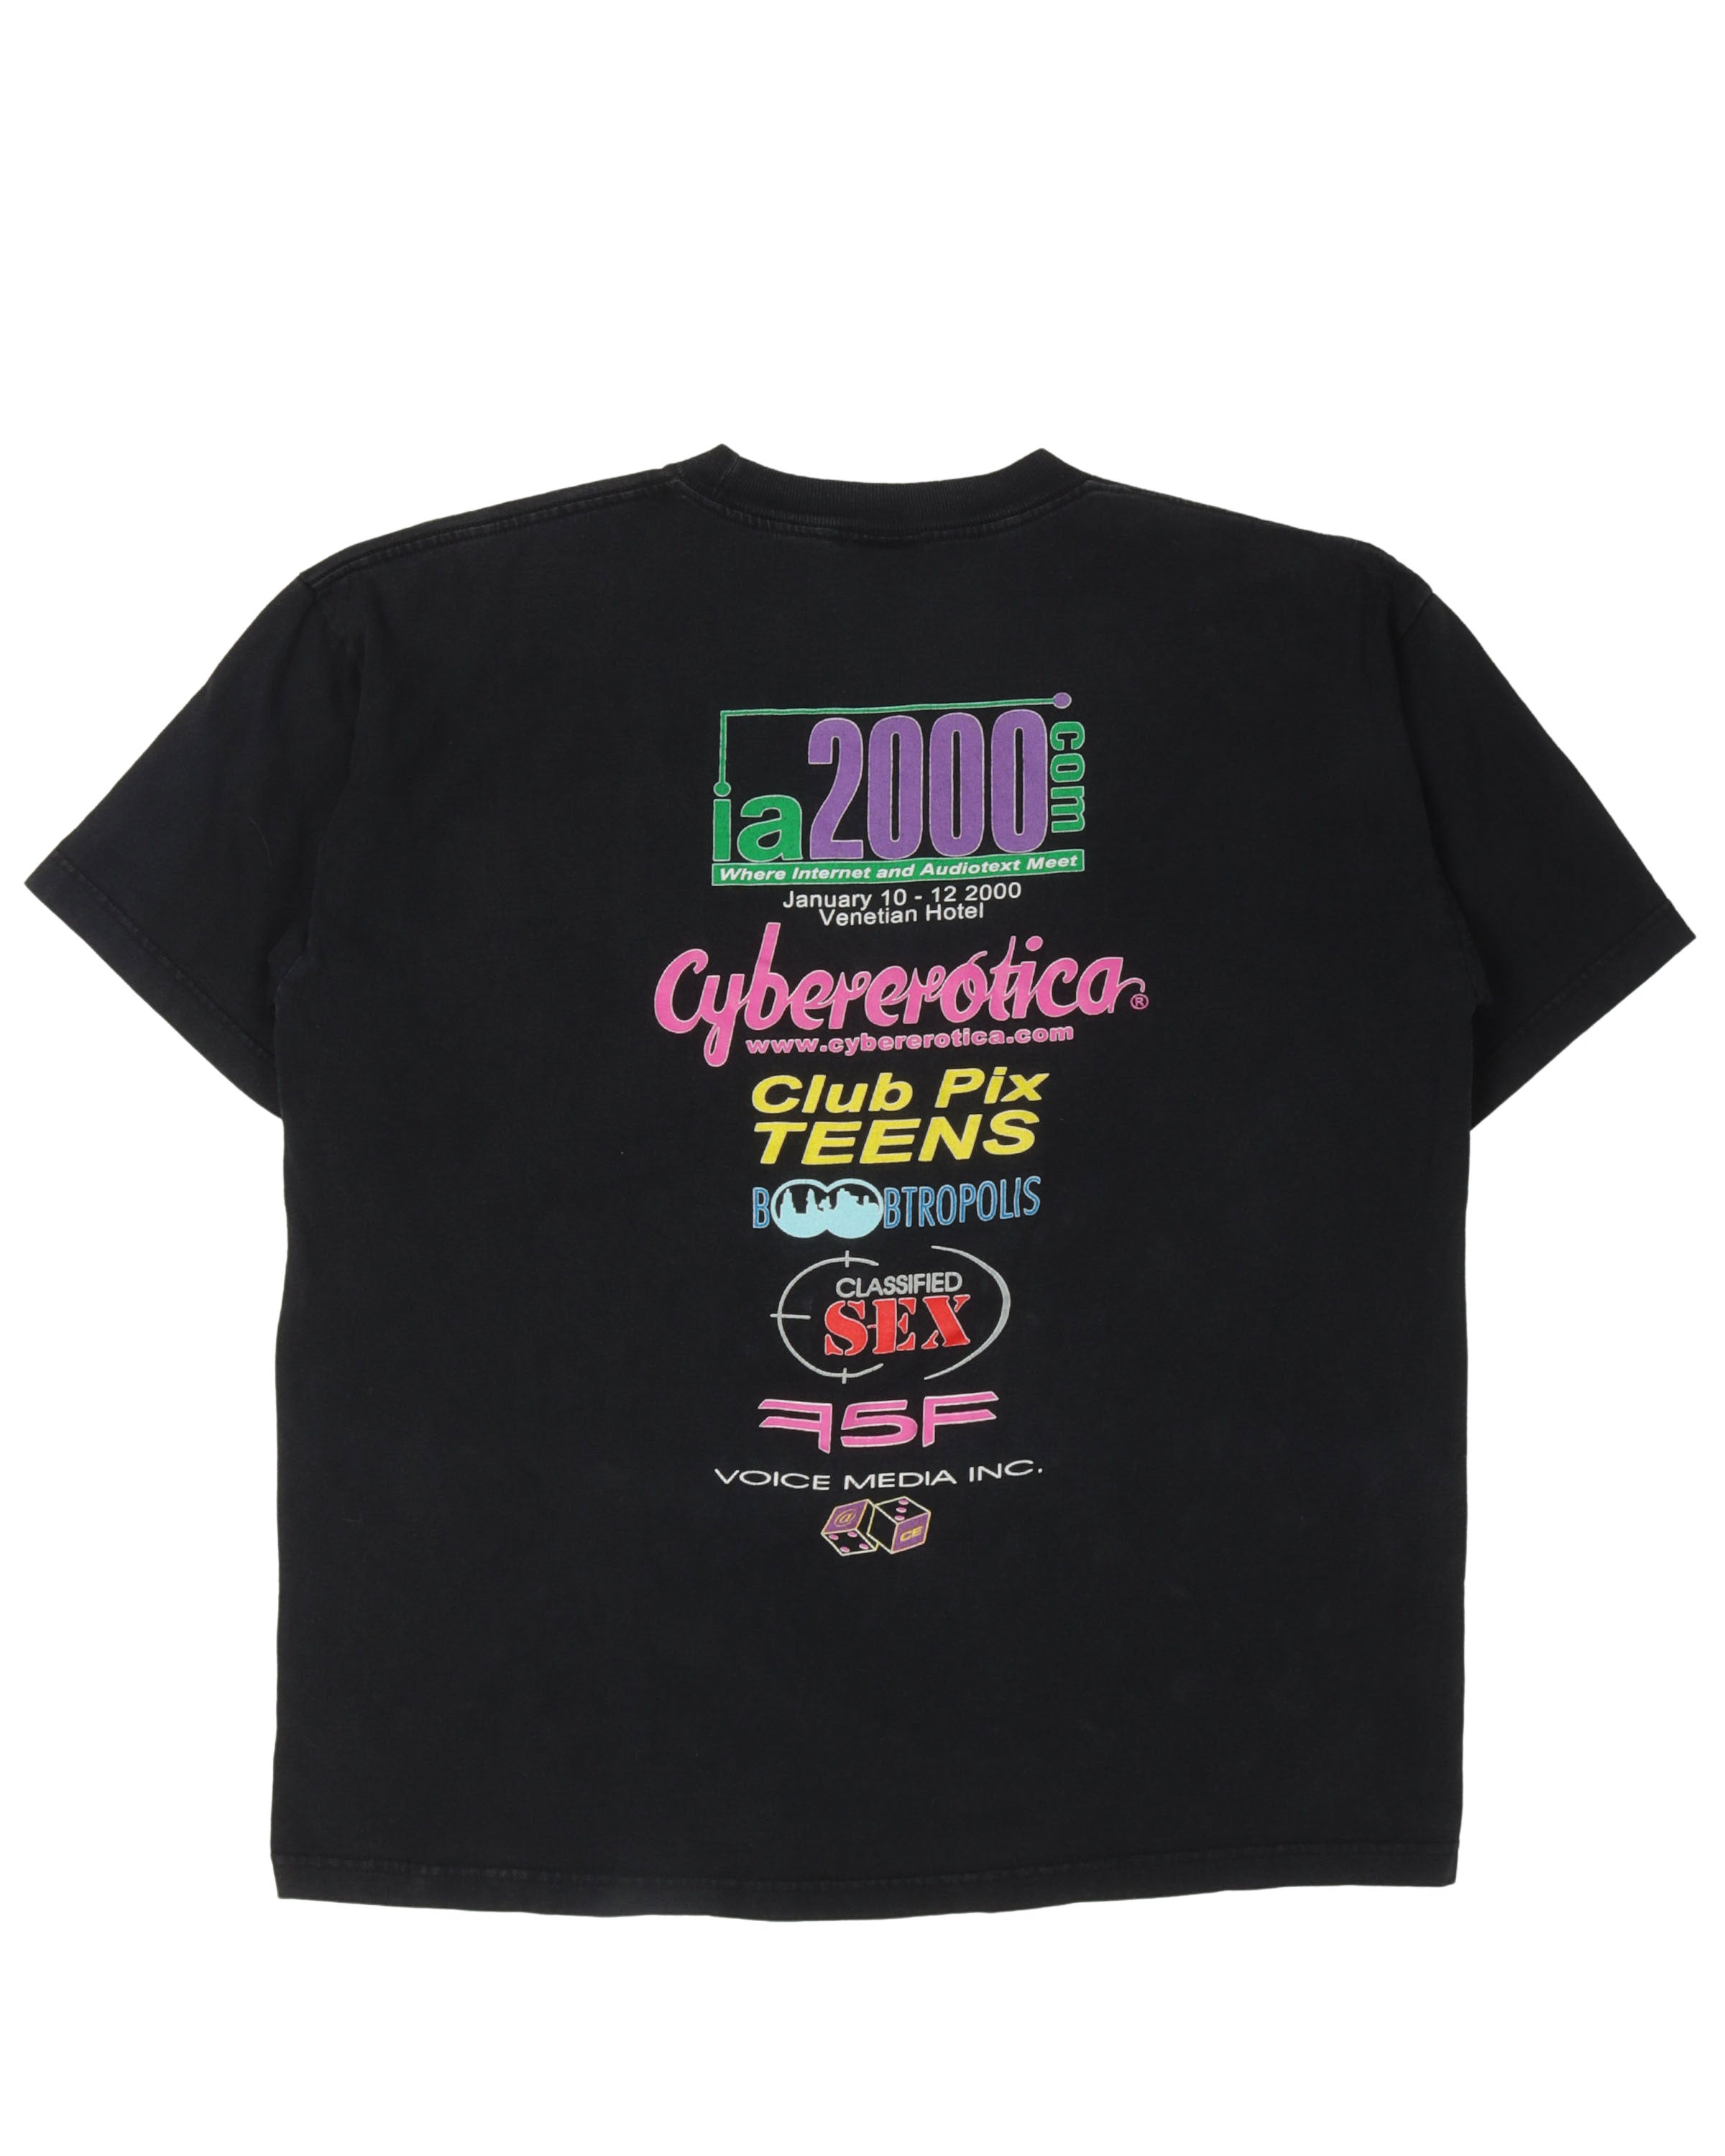 Cybererotica Adult Entertainment Convention T-Shirt